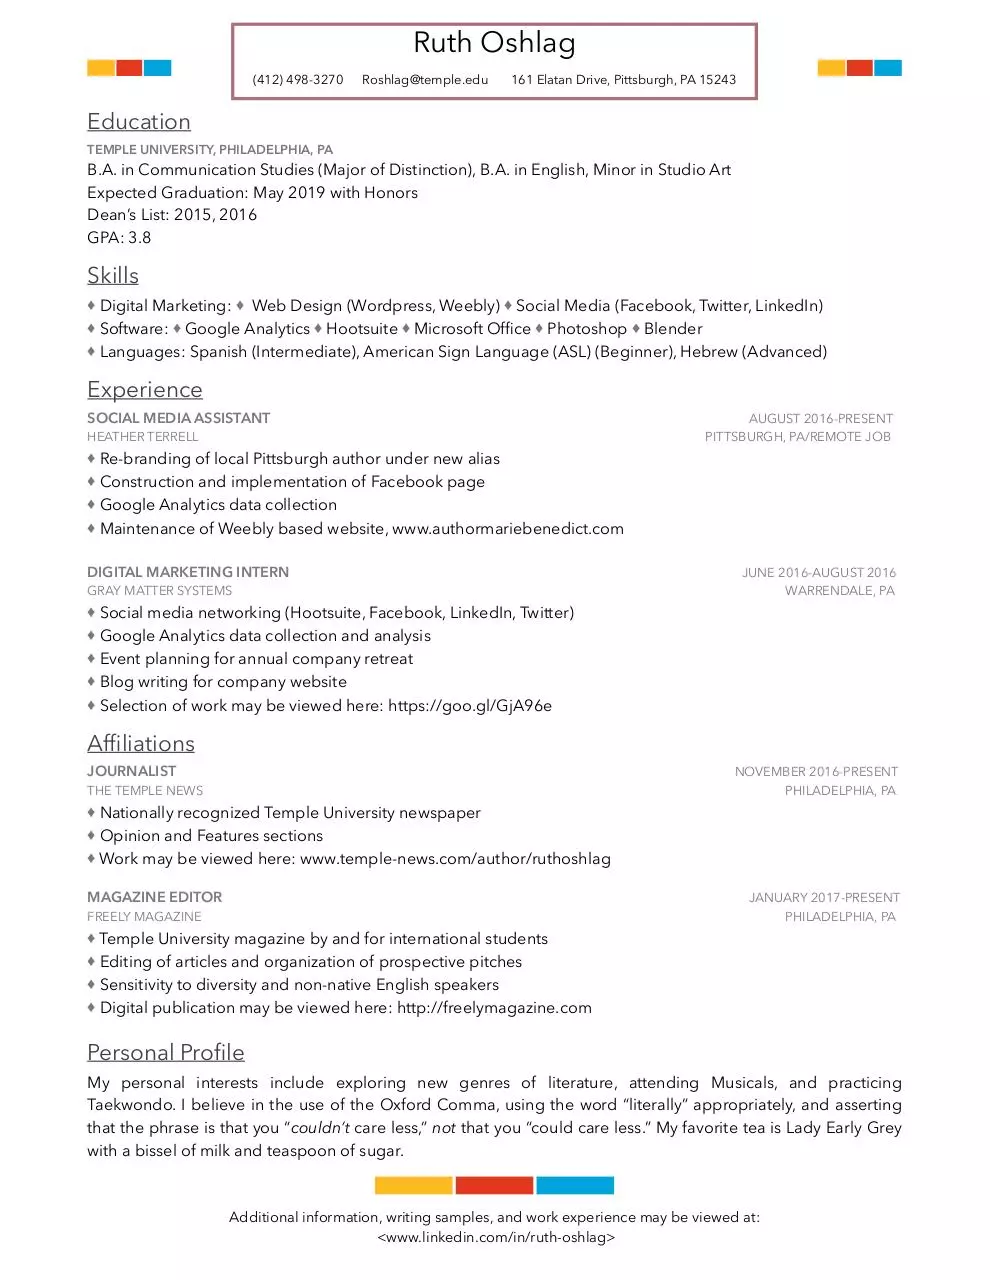 Document preview - Resume #3 - Ruth Oshlag, Temple University.pdf - Page 1/1